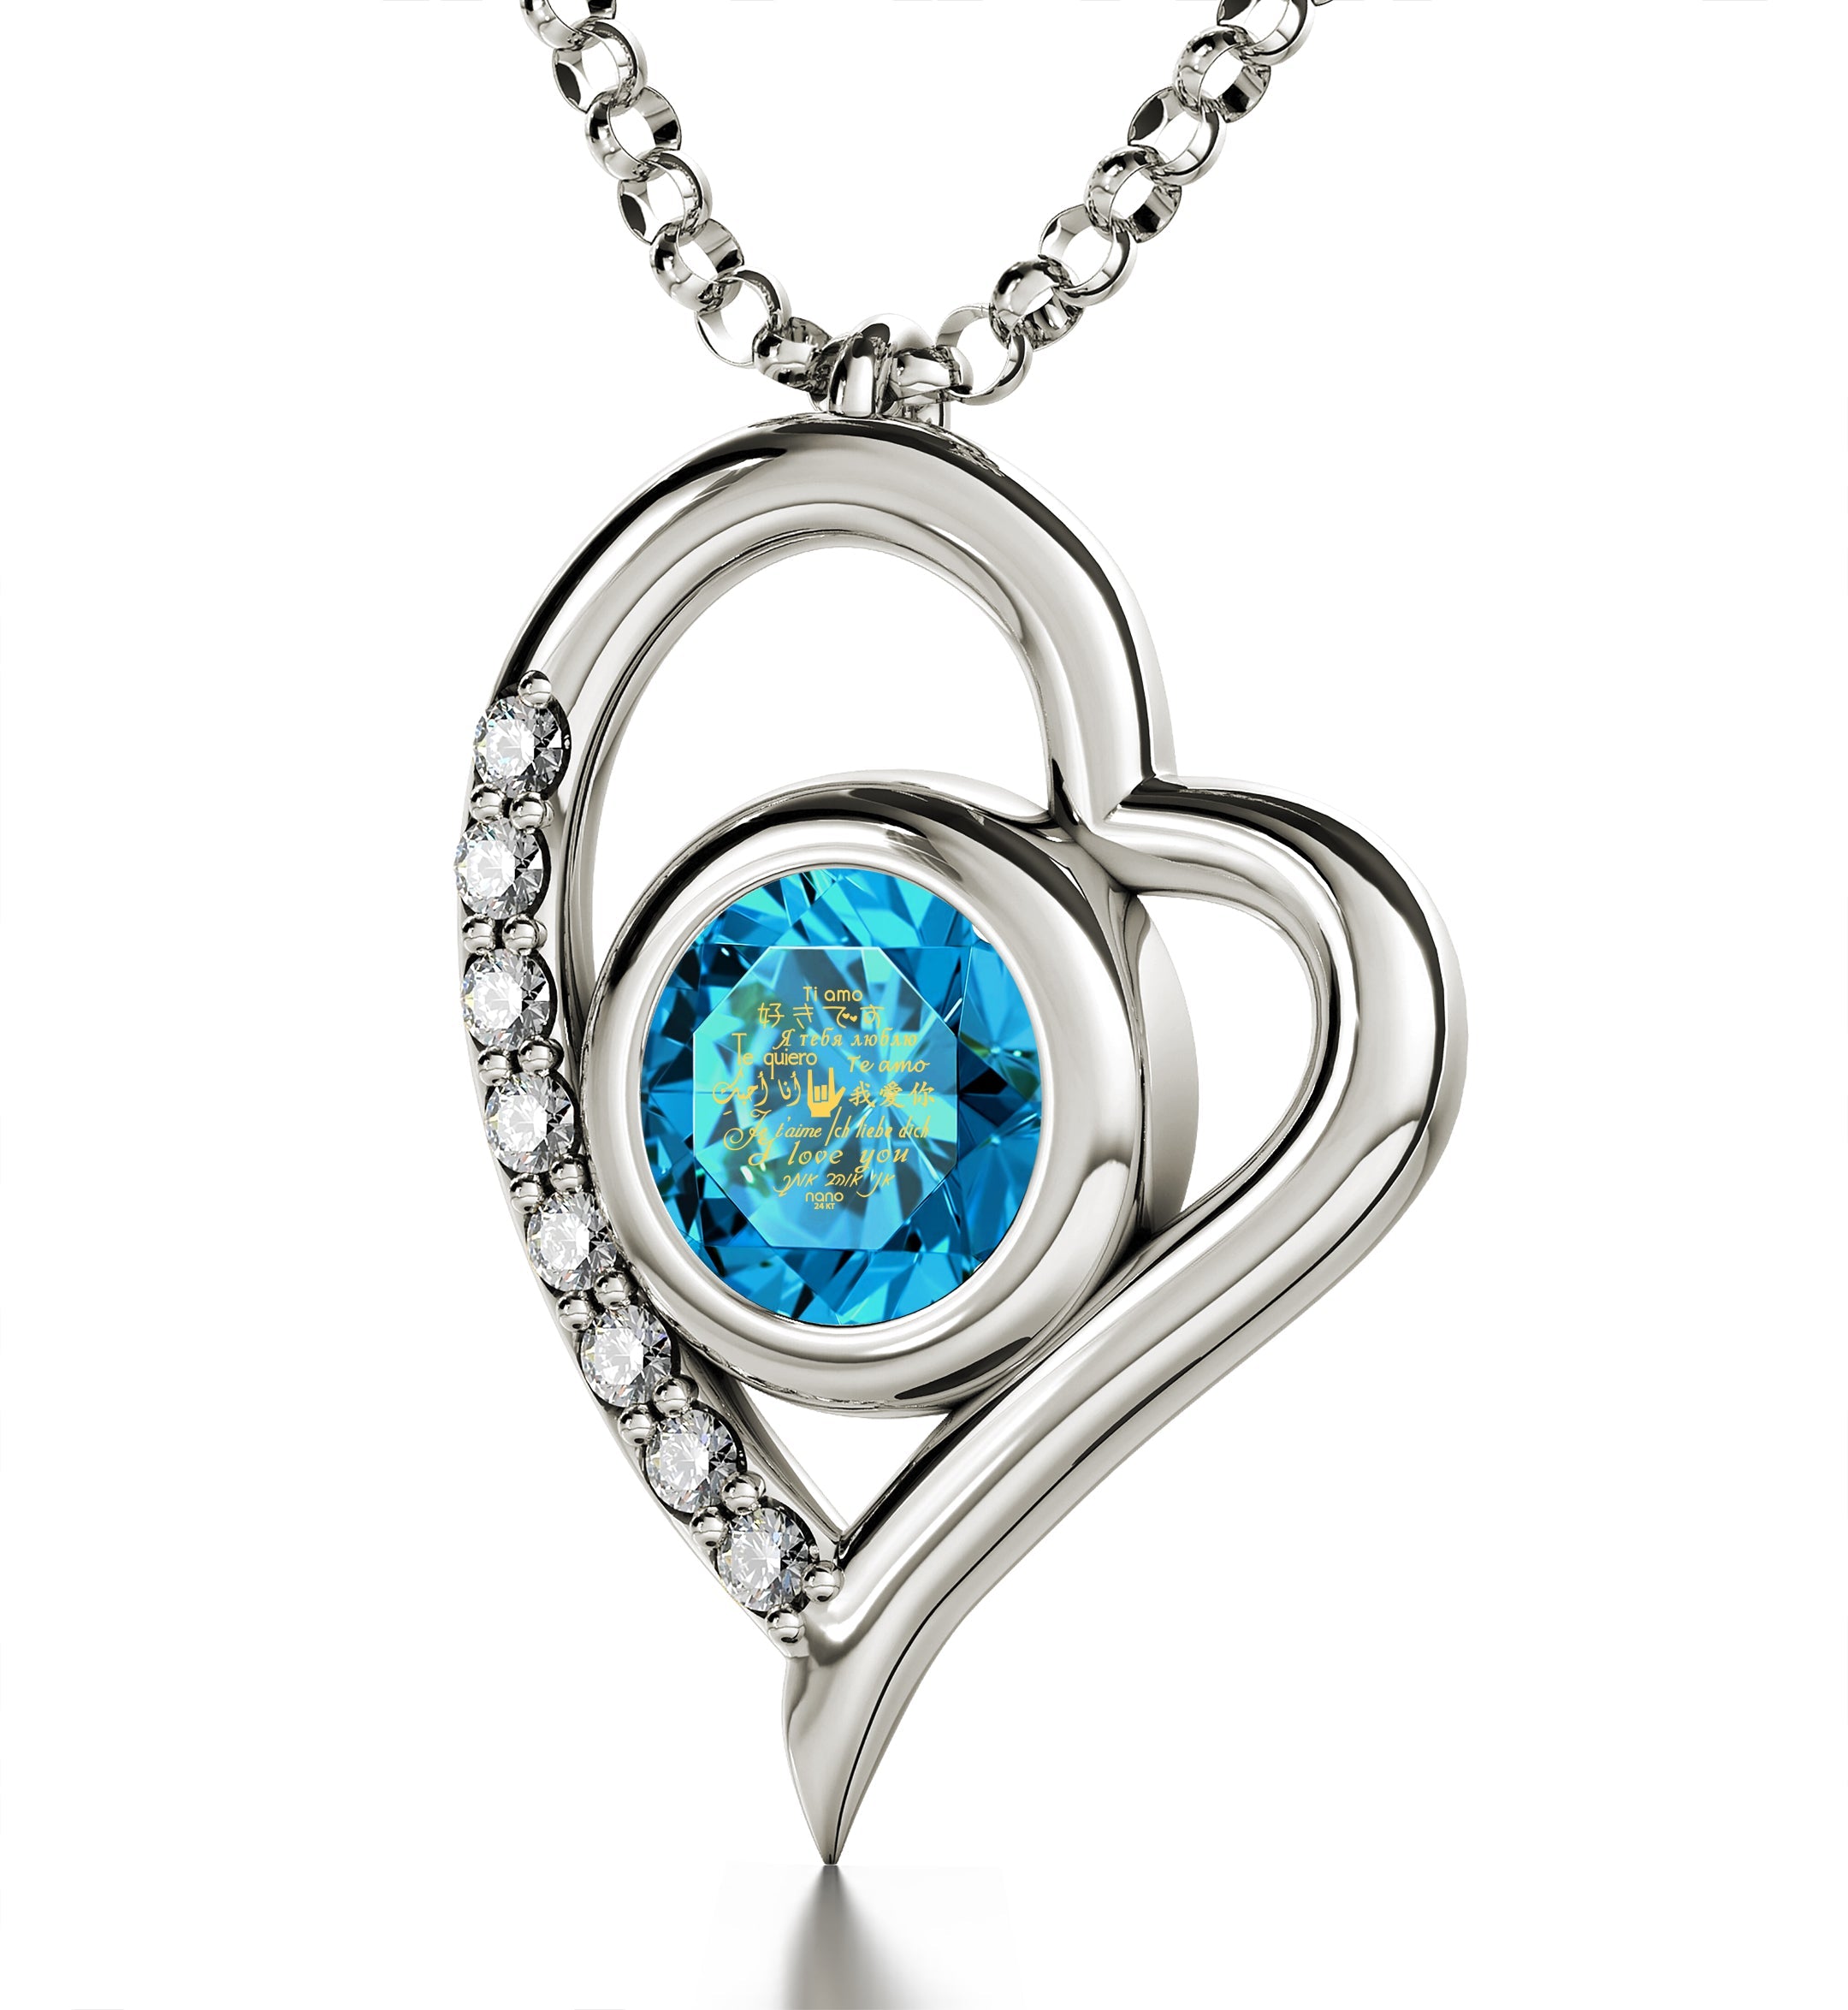 Close-up view of a 925 Sterling Silver I Love You Heart Pendant Necklace featuring a deep blue gemstone engraved with "i love you" in multiple languages, set in a polished silver band—perfect as an anniversary gift for her.